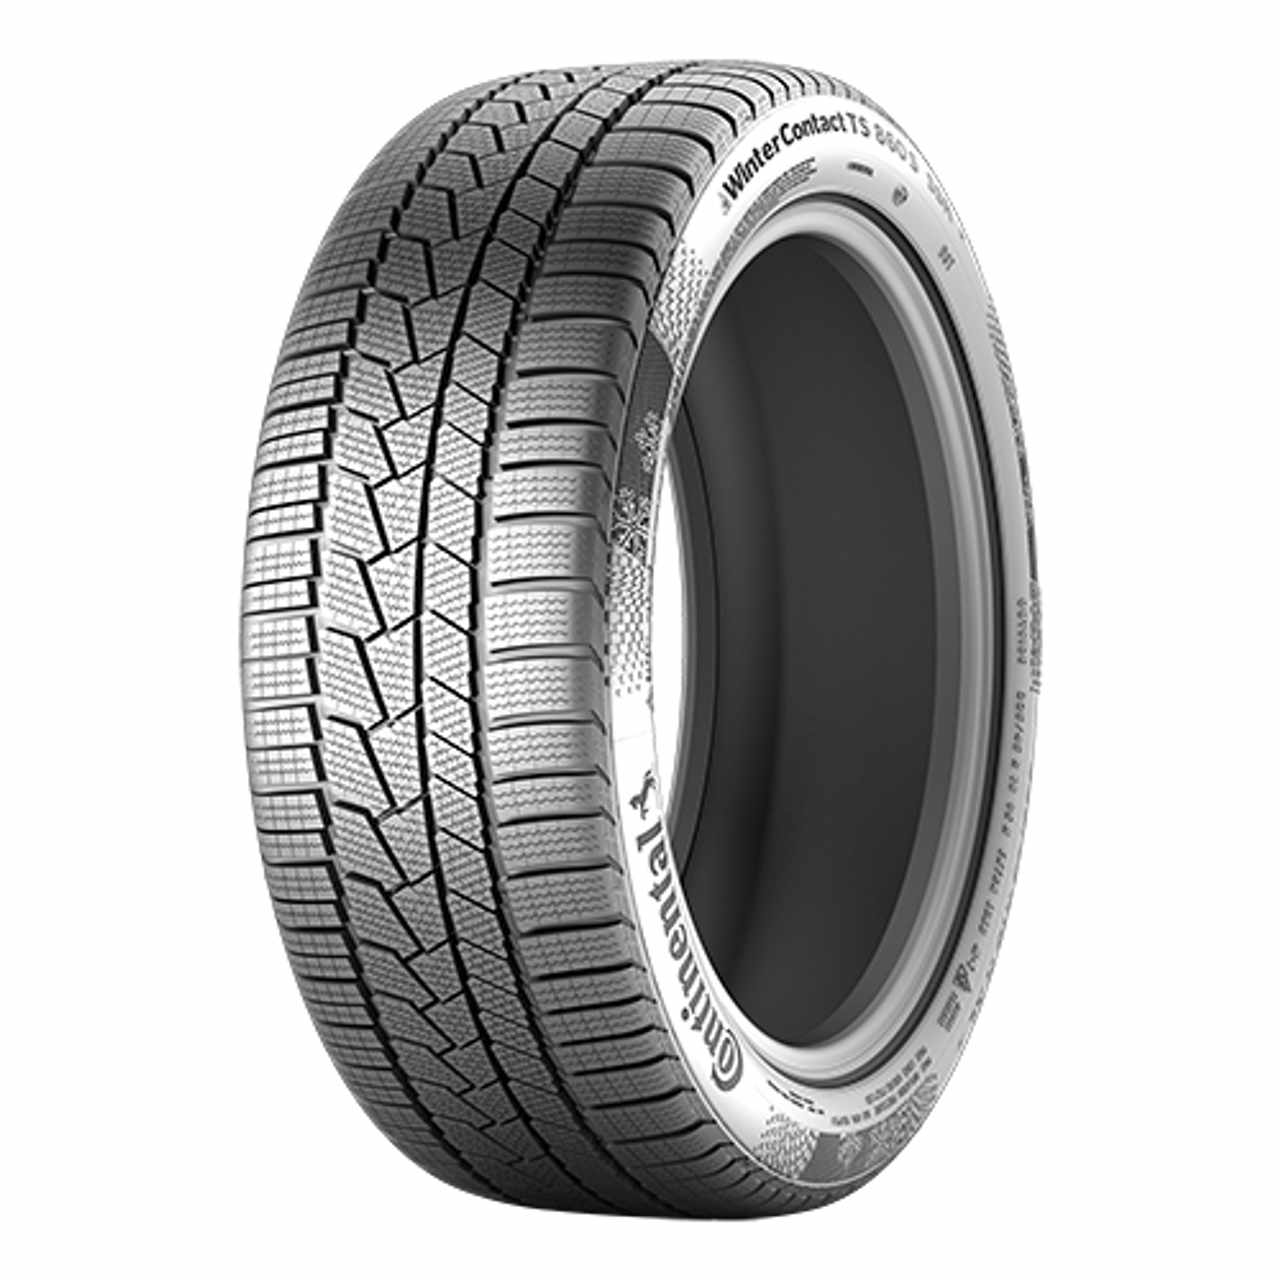 CONTINENTAL WINTERCONTACT TS 860 S (EVc) 265/35R21 101W FR BSW